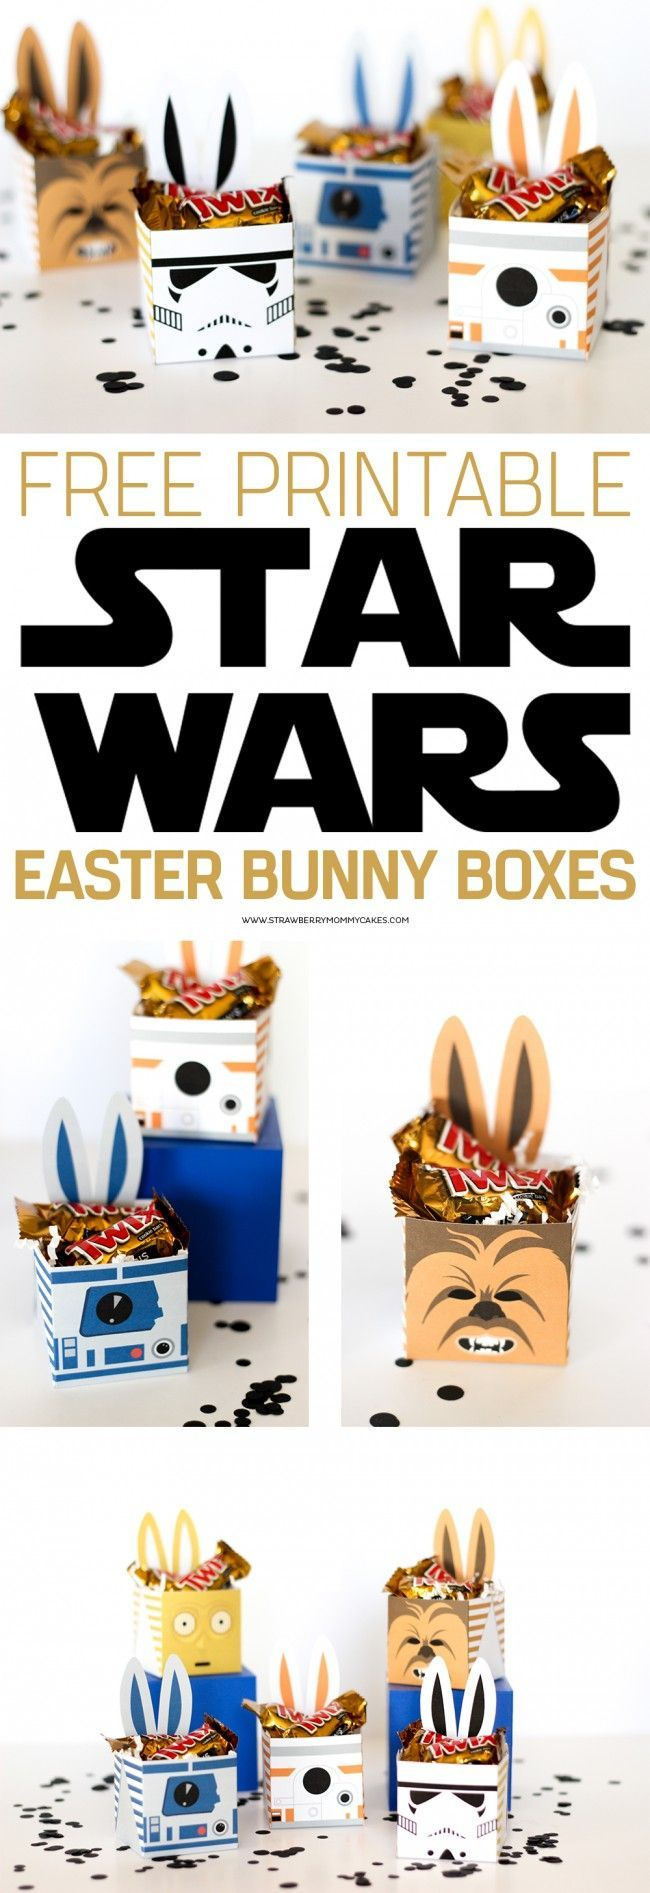 May The Force Be With You This Easter With These Fun Star Wars - May The Force Be With You Free Printable